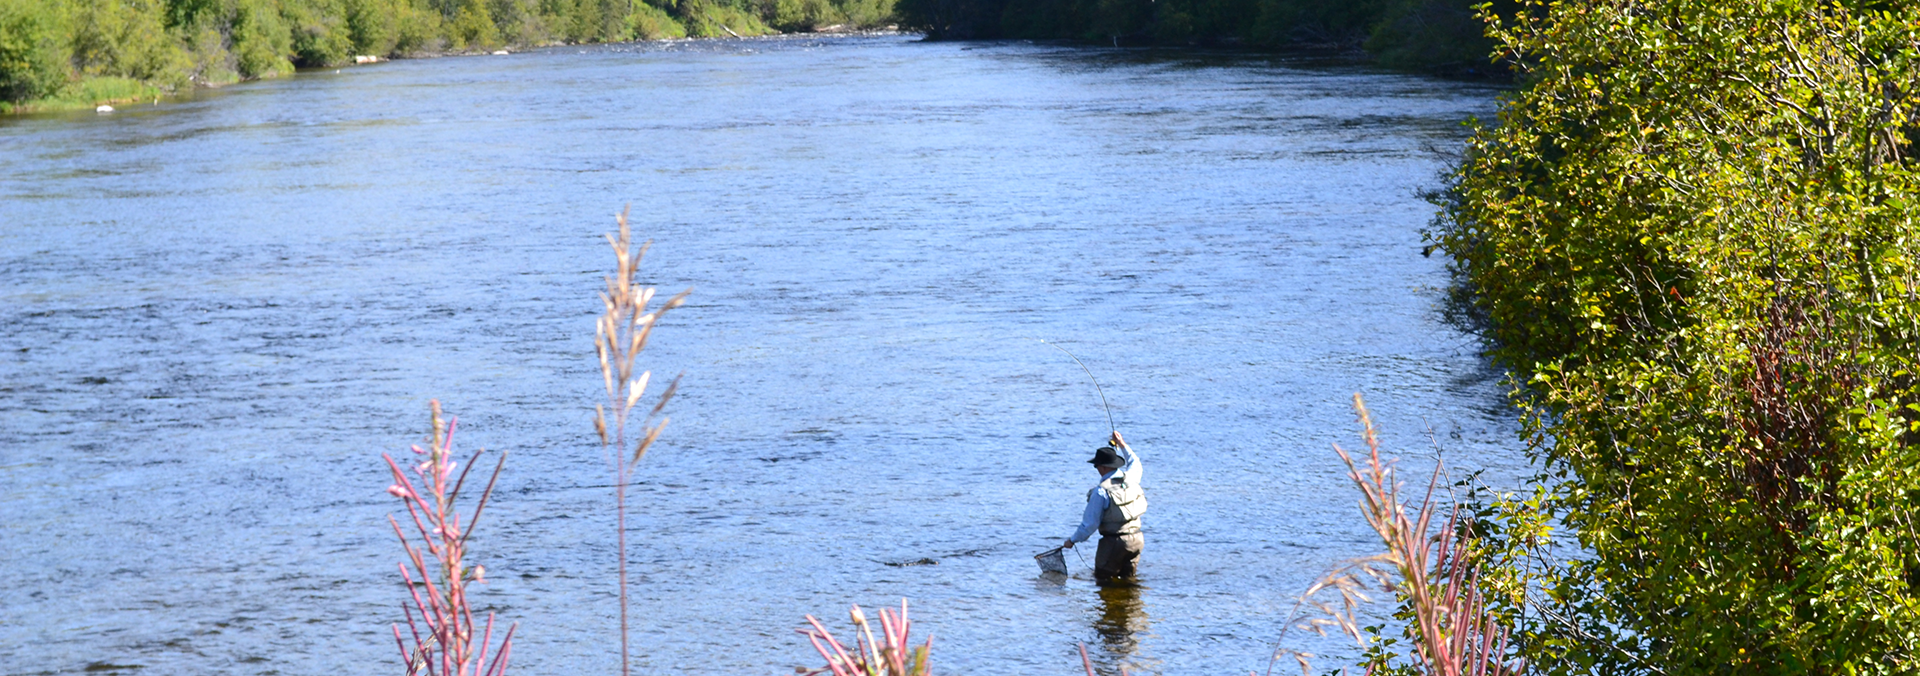 3 Patterns to Try for River Fly Fishing Success